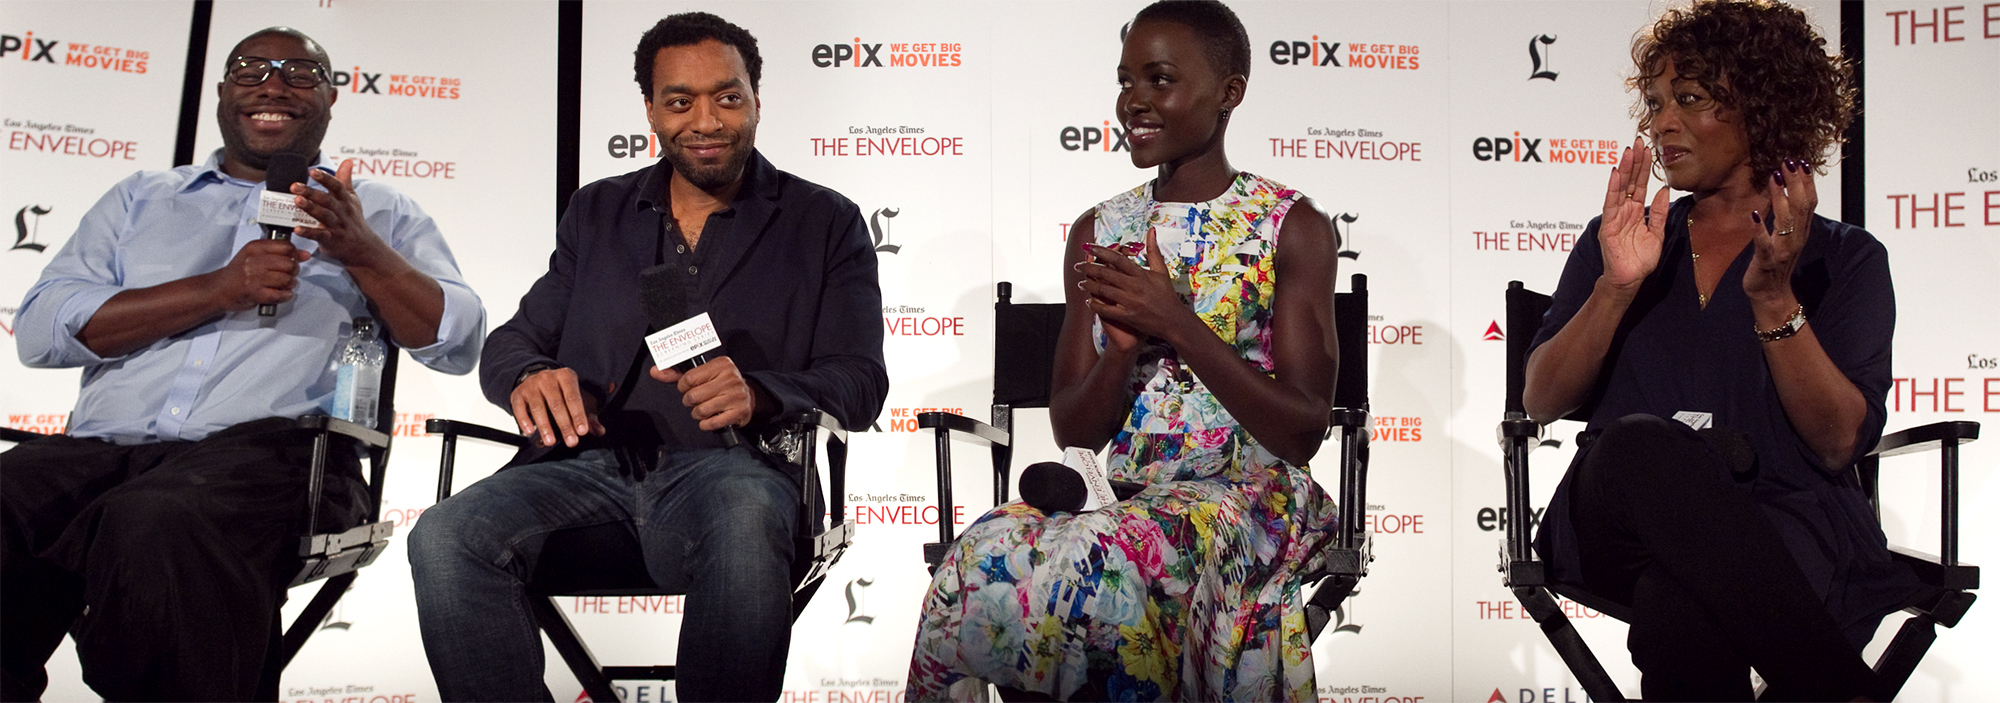 Alfre Woodard, Chiwetel Ejiofor, Lupita Nyong'o and Steve McQueen at event of 12 vergoves metu (2013)